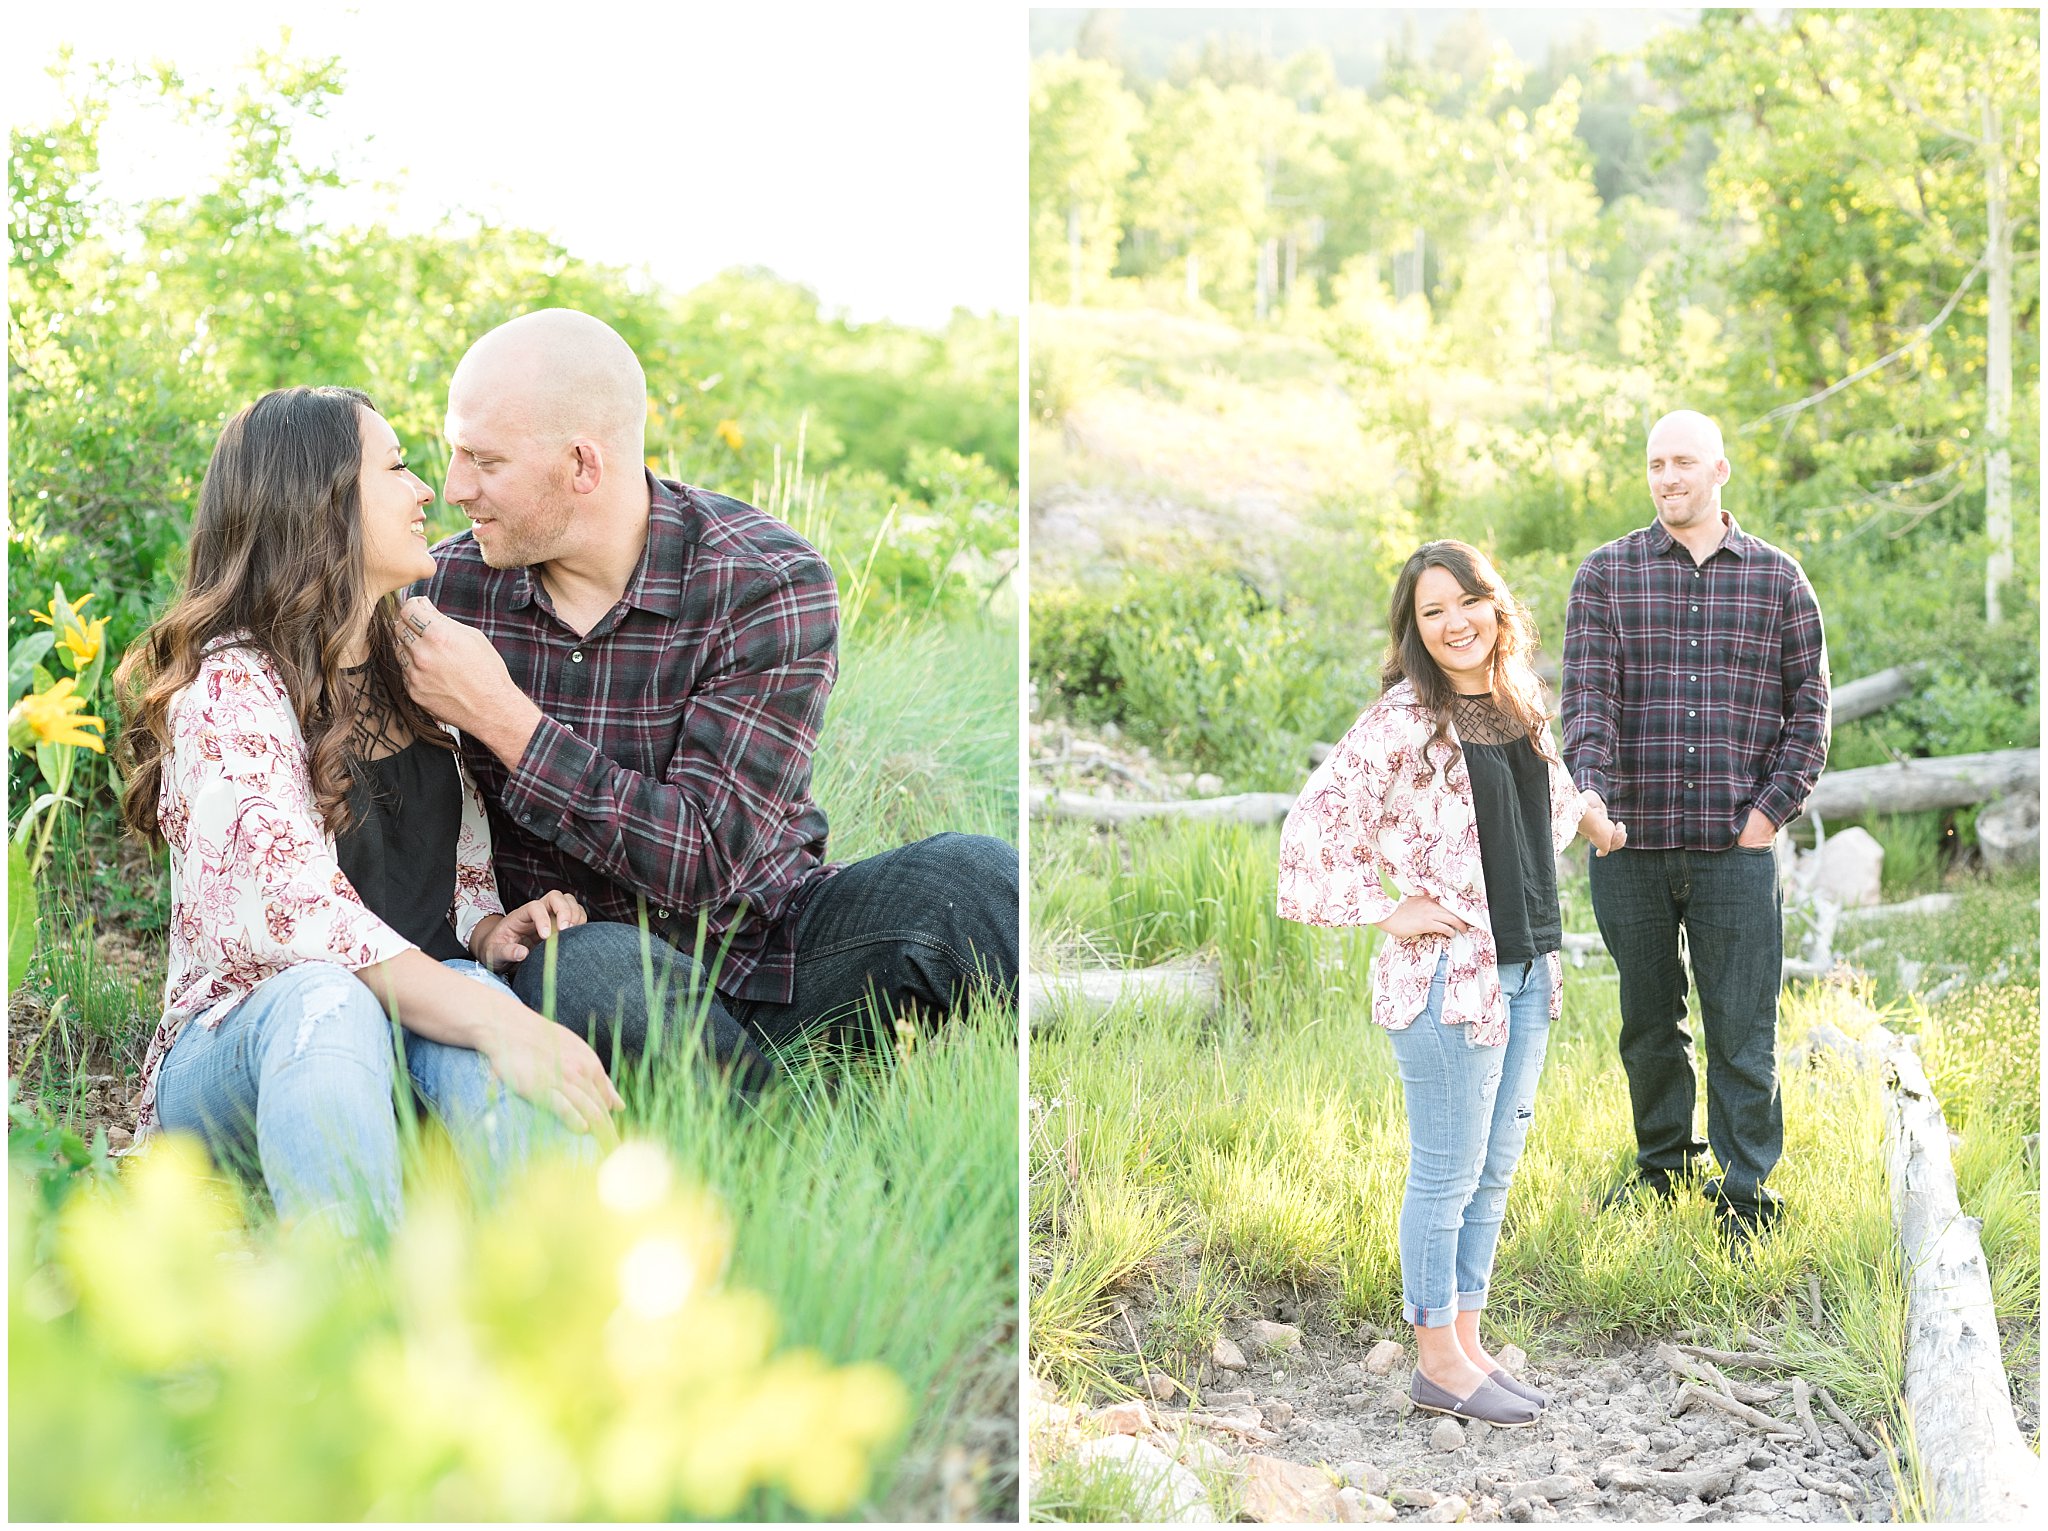 Candid couple pictures in the Aspen Trees and wildflowers during engagement session | Snowbasin Utah Engagements